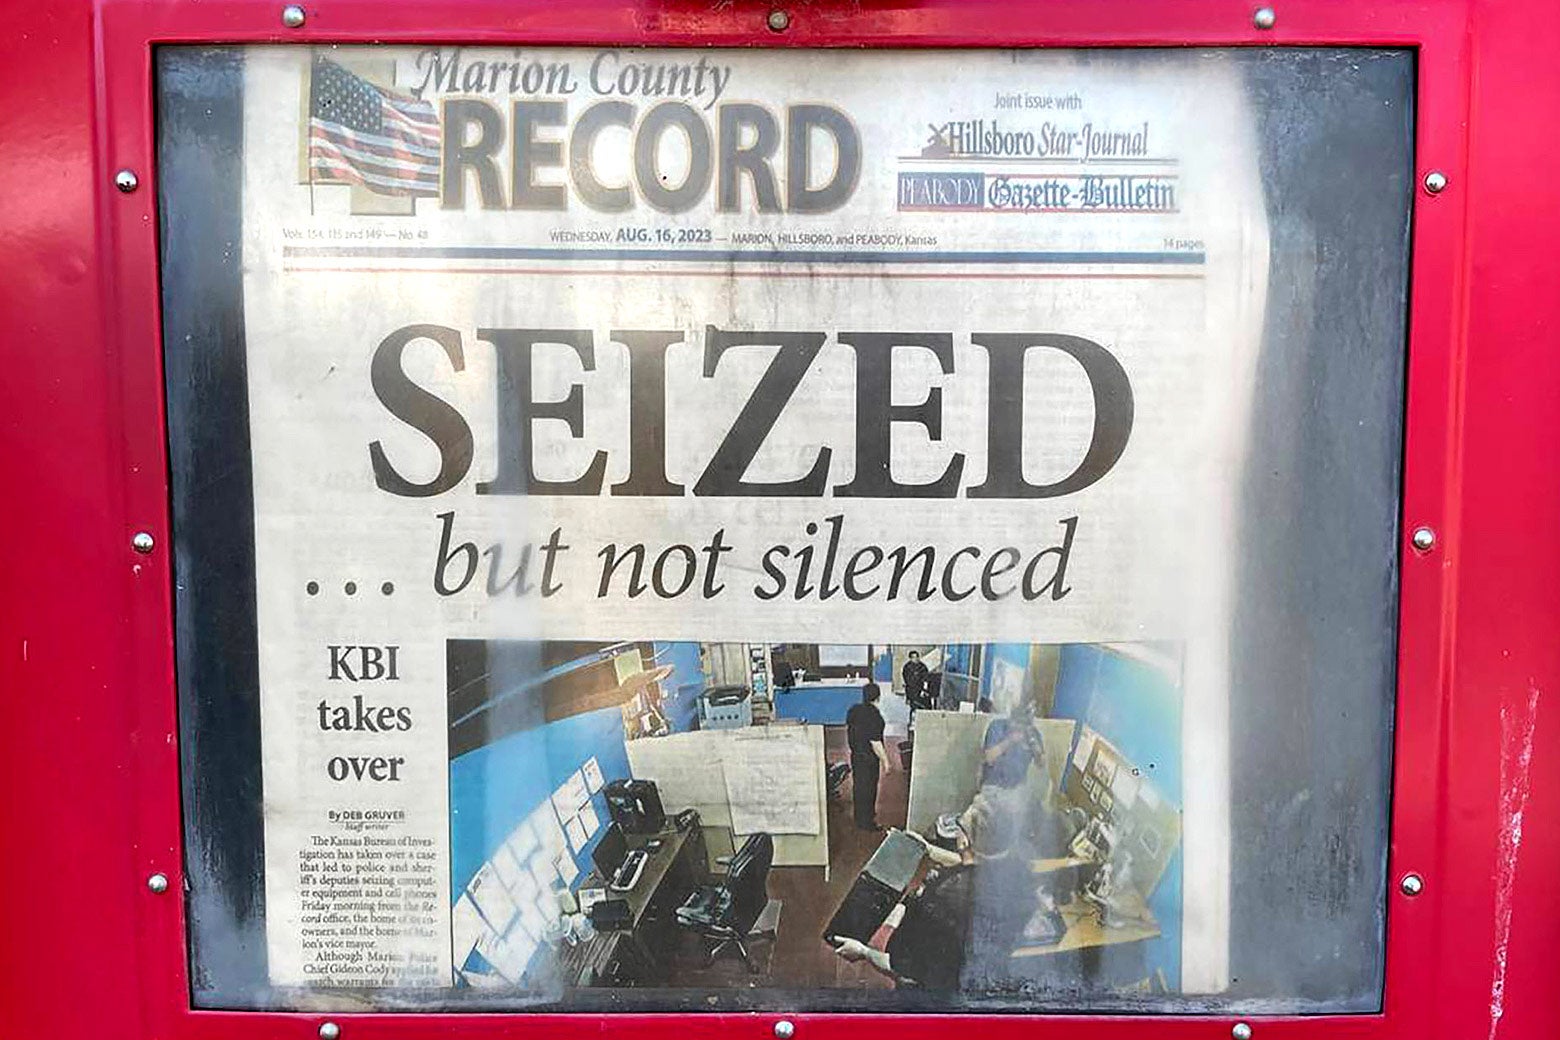 The first edition of the Marion County Record on Aug. 16 after its newsroom in central Kansas was raided by police.